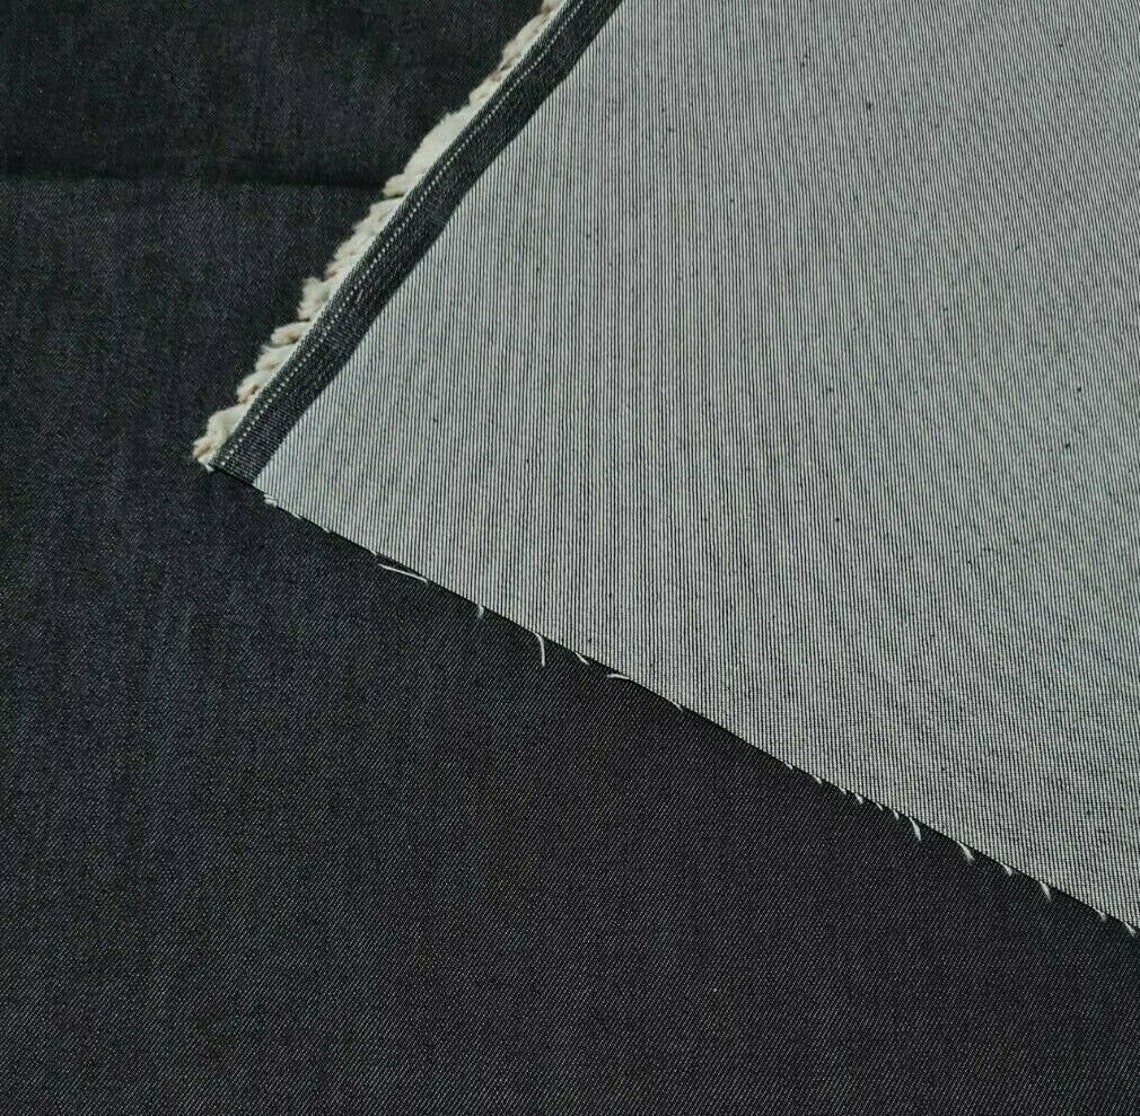 Cotton Denim Fabric Navy Melange Sold By The Metre | Etsy